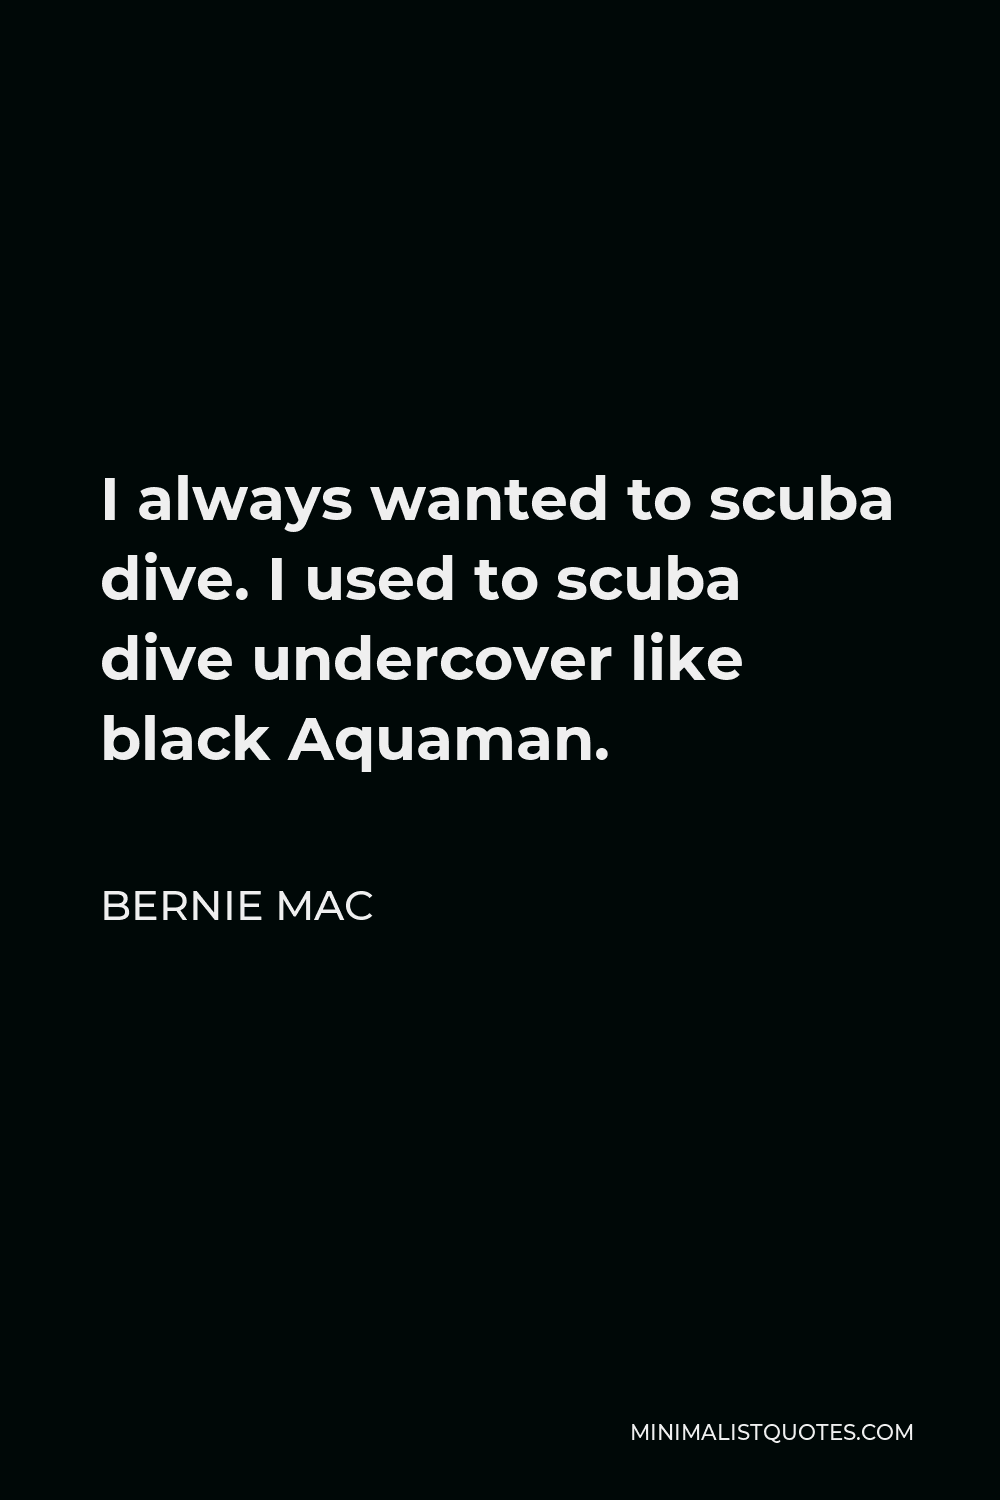 Bernie Mac Quote - I always wanted to scuba dive. I used to scuba dive undercover like black Aquaman.